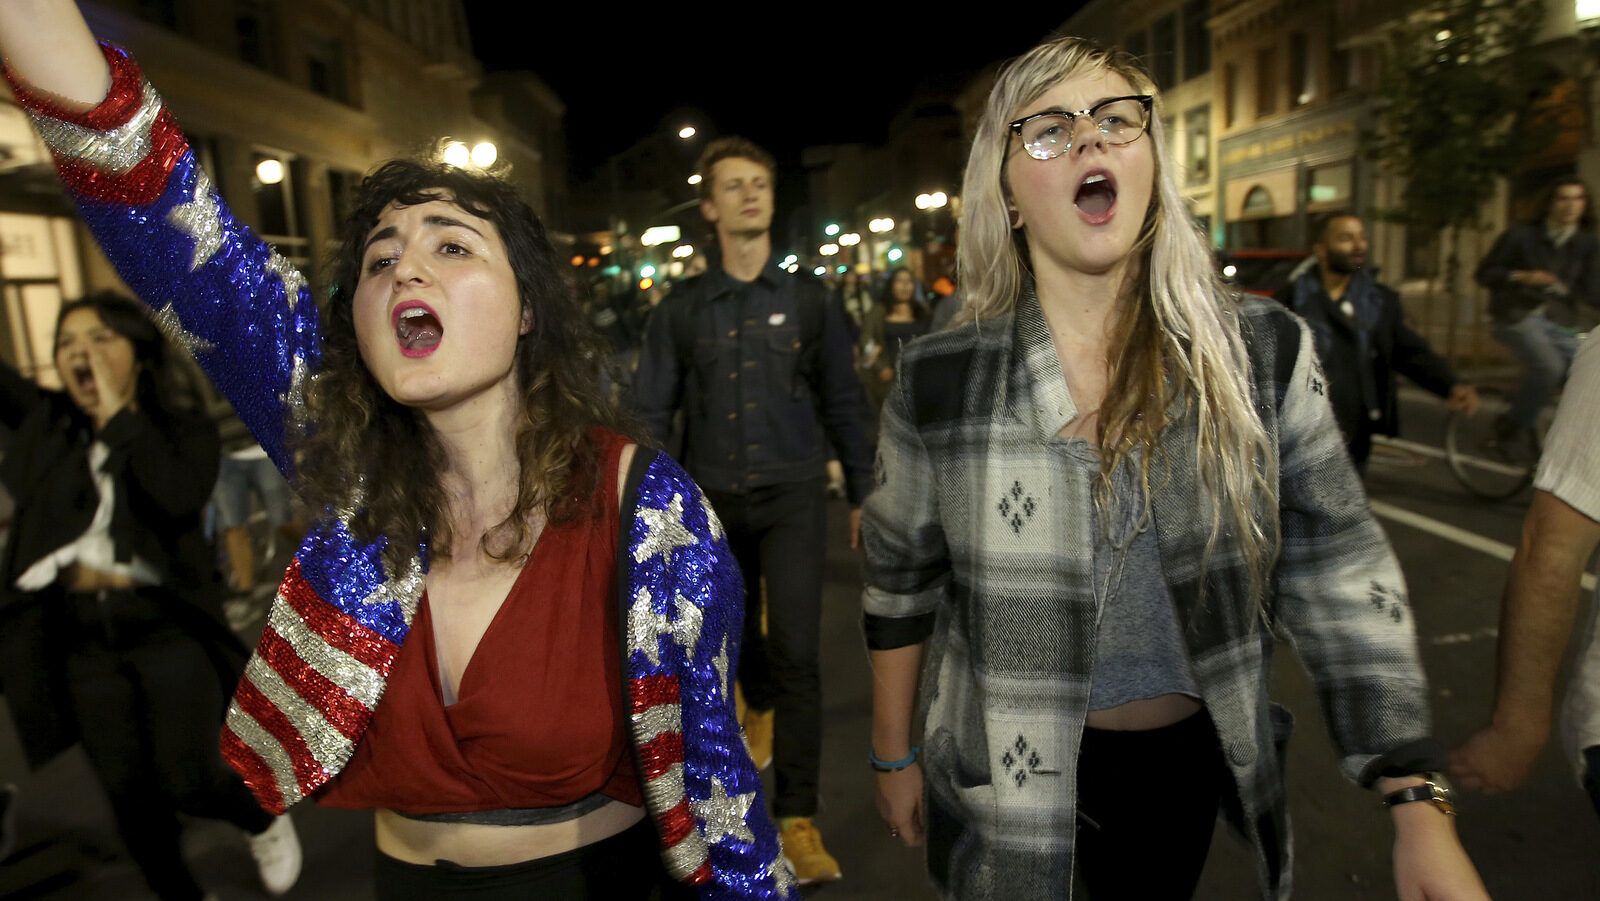 Madeline Lopes, left, and Cassidy Irwin, both of Oakland, march with other protesters in downtown Oakland, Calif., early Wednesday, Nov. 9, 2016. President-elect Donald Trump’s victory set off multiple protests. (Jane Tyska/Bay Area News Group via AP)